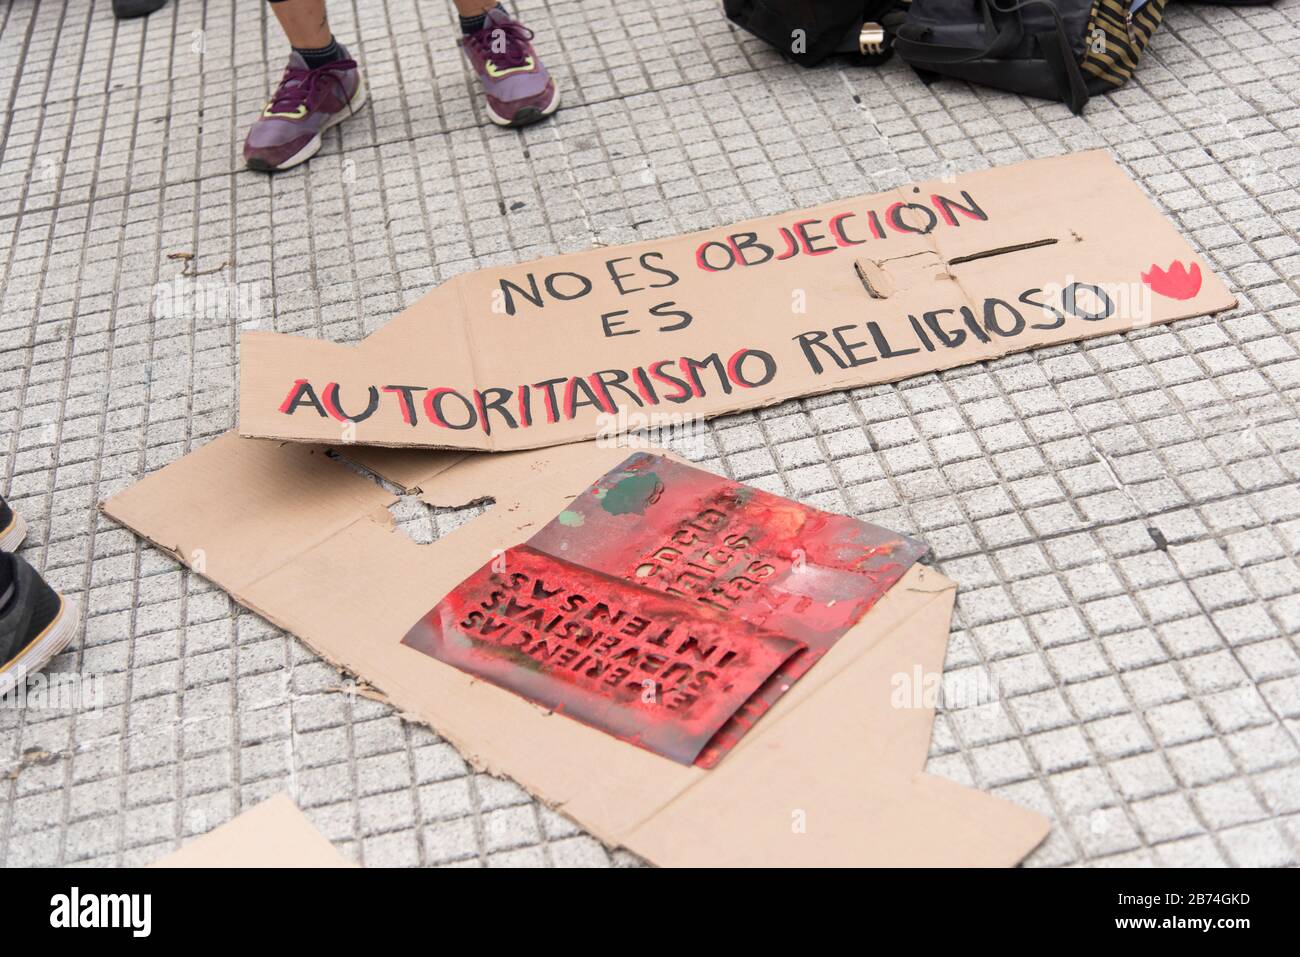 CABA, Buenos Aires / Argentina; March 9, 2020: international women's day. Poster related to the legal abortion law and conscientious objection: It is Stock Photo